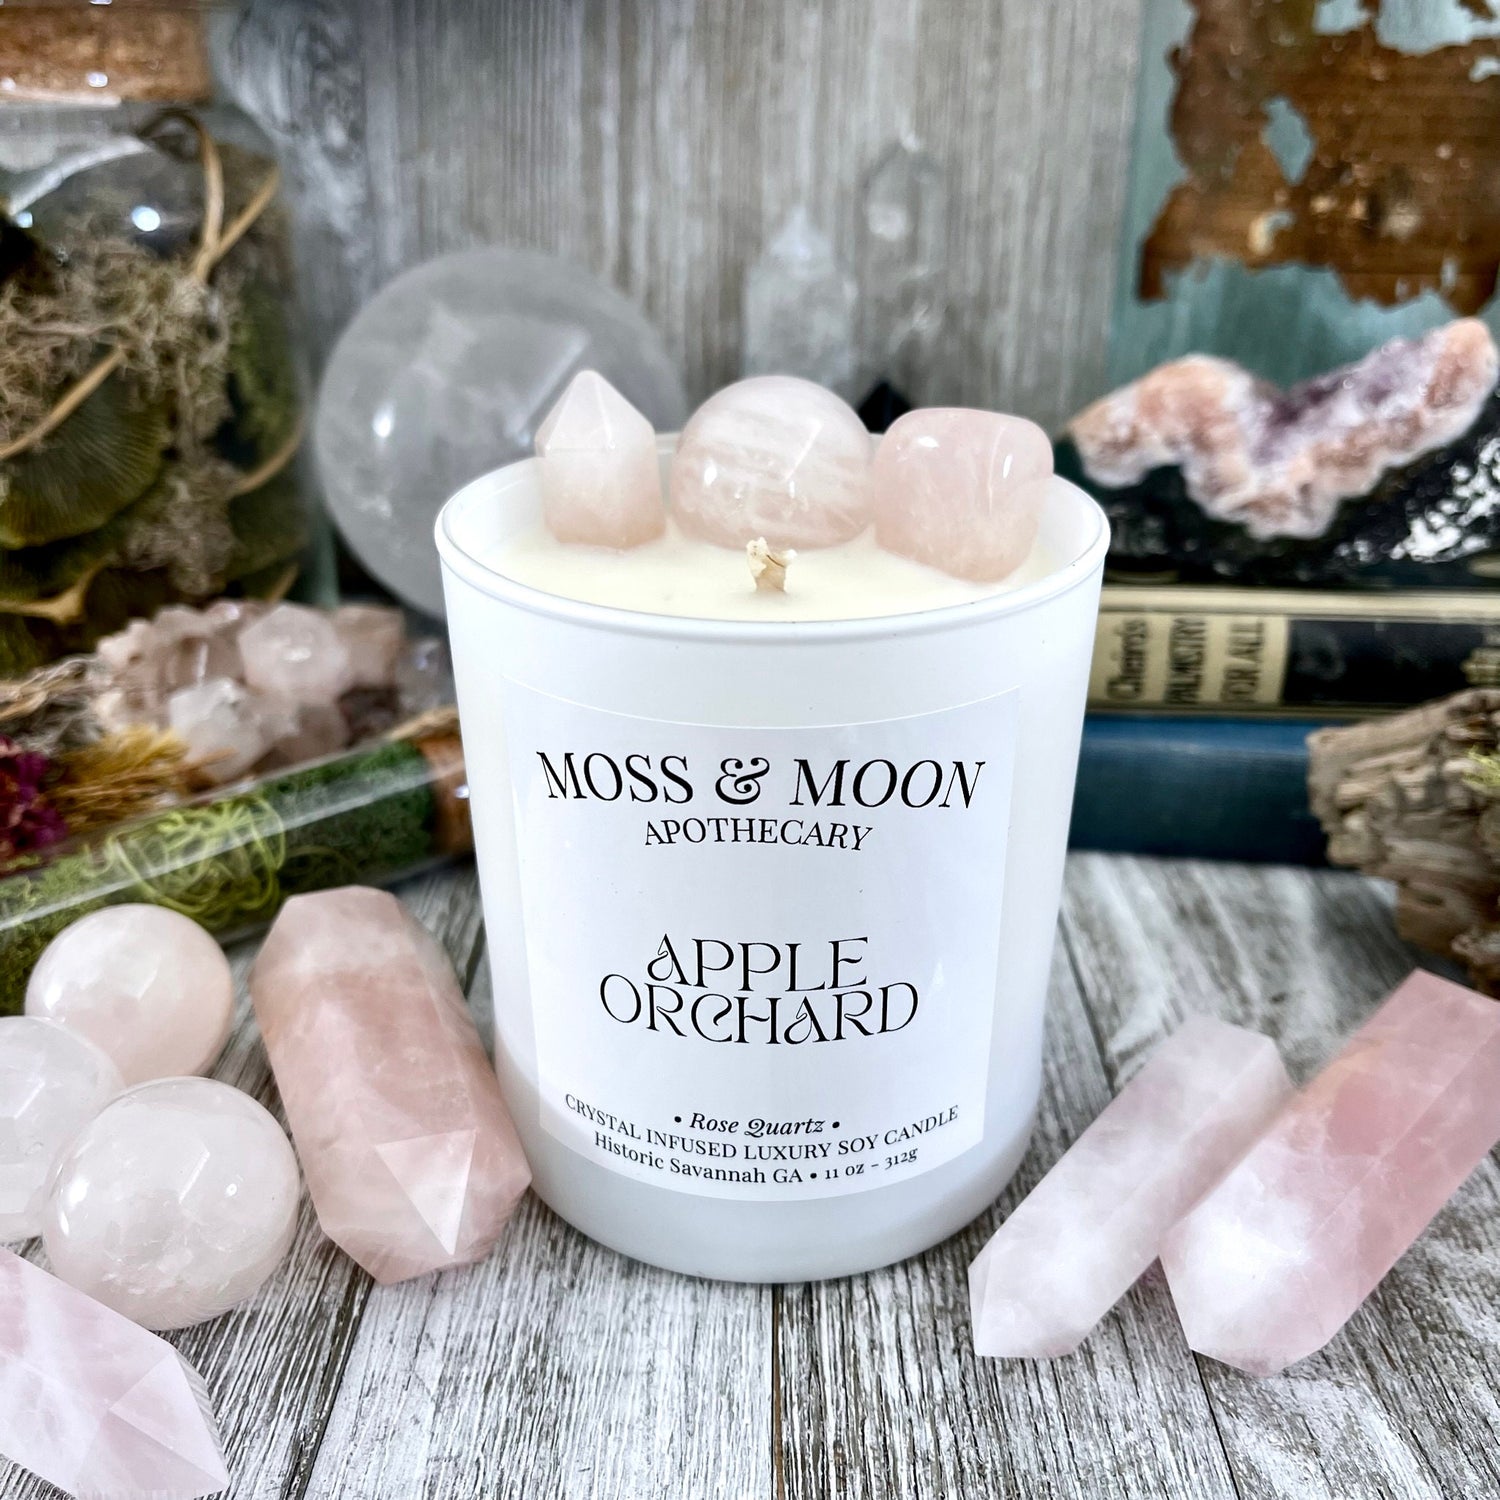 Apple Orchard Candle with Rose Quartz - Moss & Moon Apothecary Crystal Infused Luxury Soy Candle